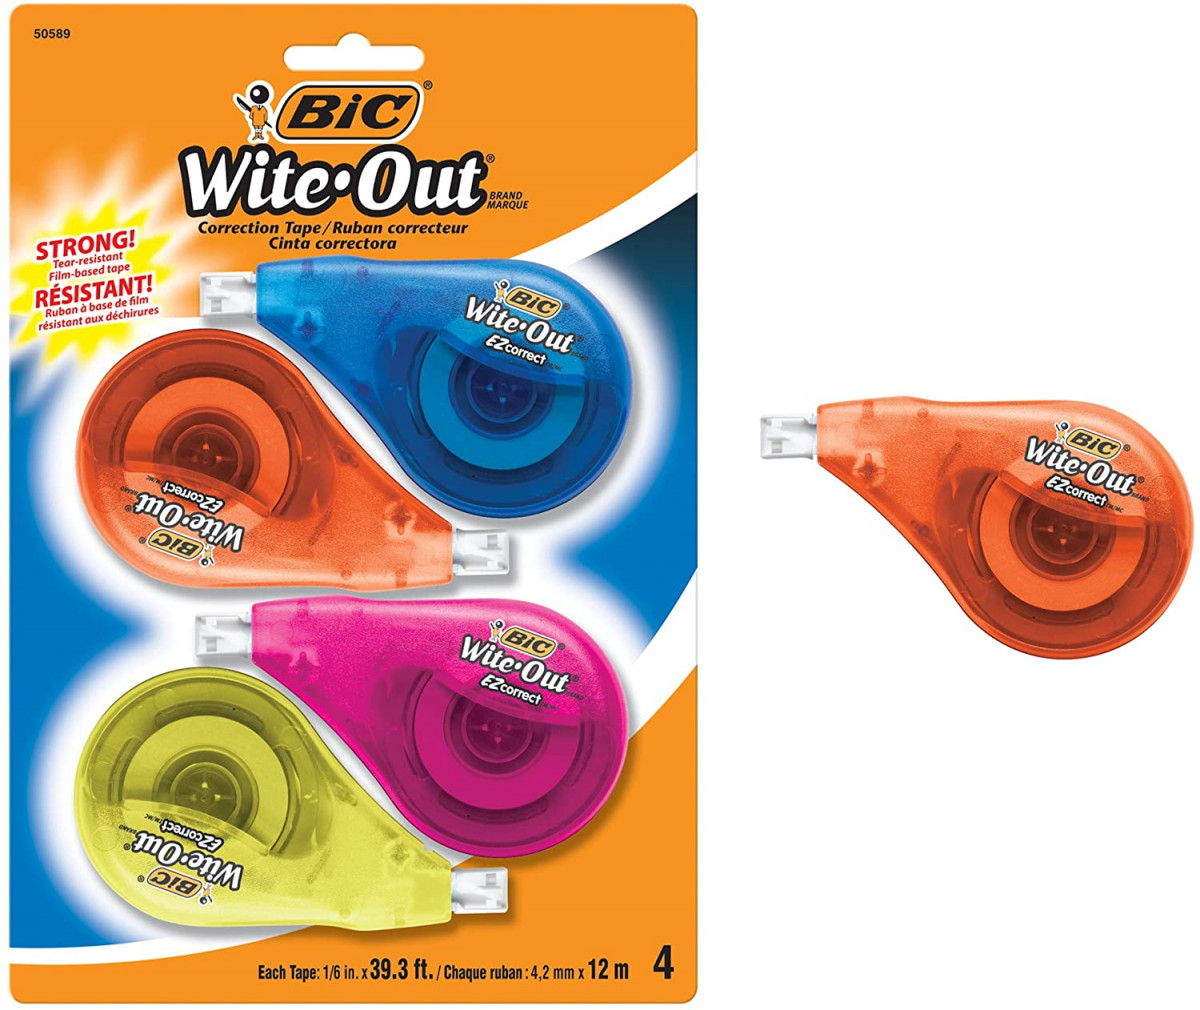 Alea's Deals 65% Off BIC Clean Wite-Out Brand EZ Correct Correction Tape, 4-Count! Was $12.95!  